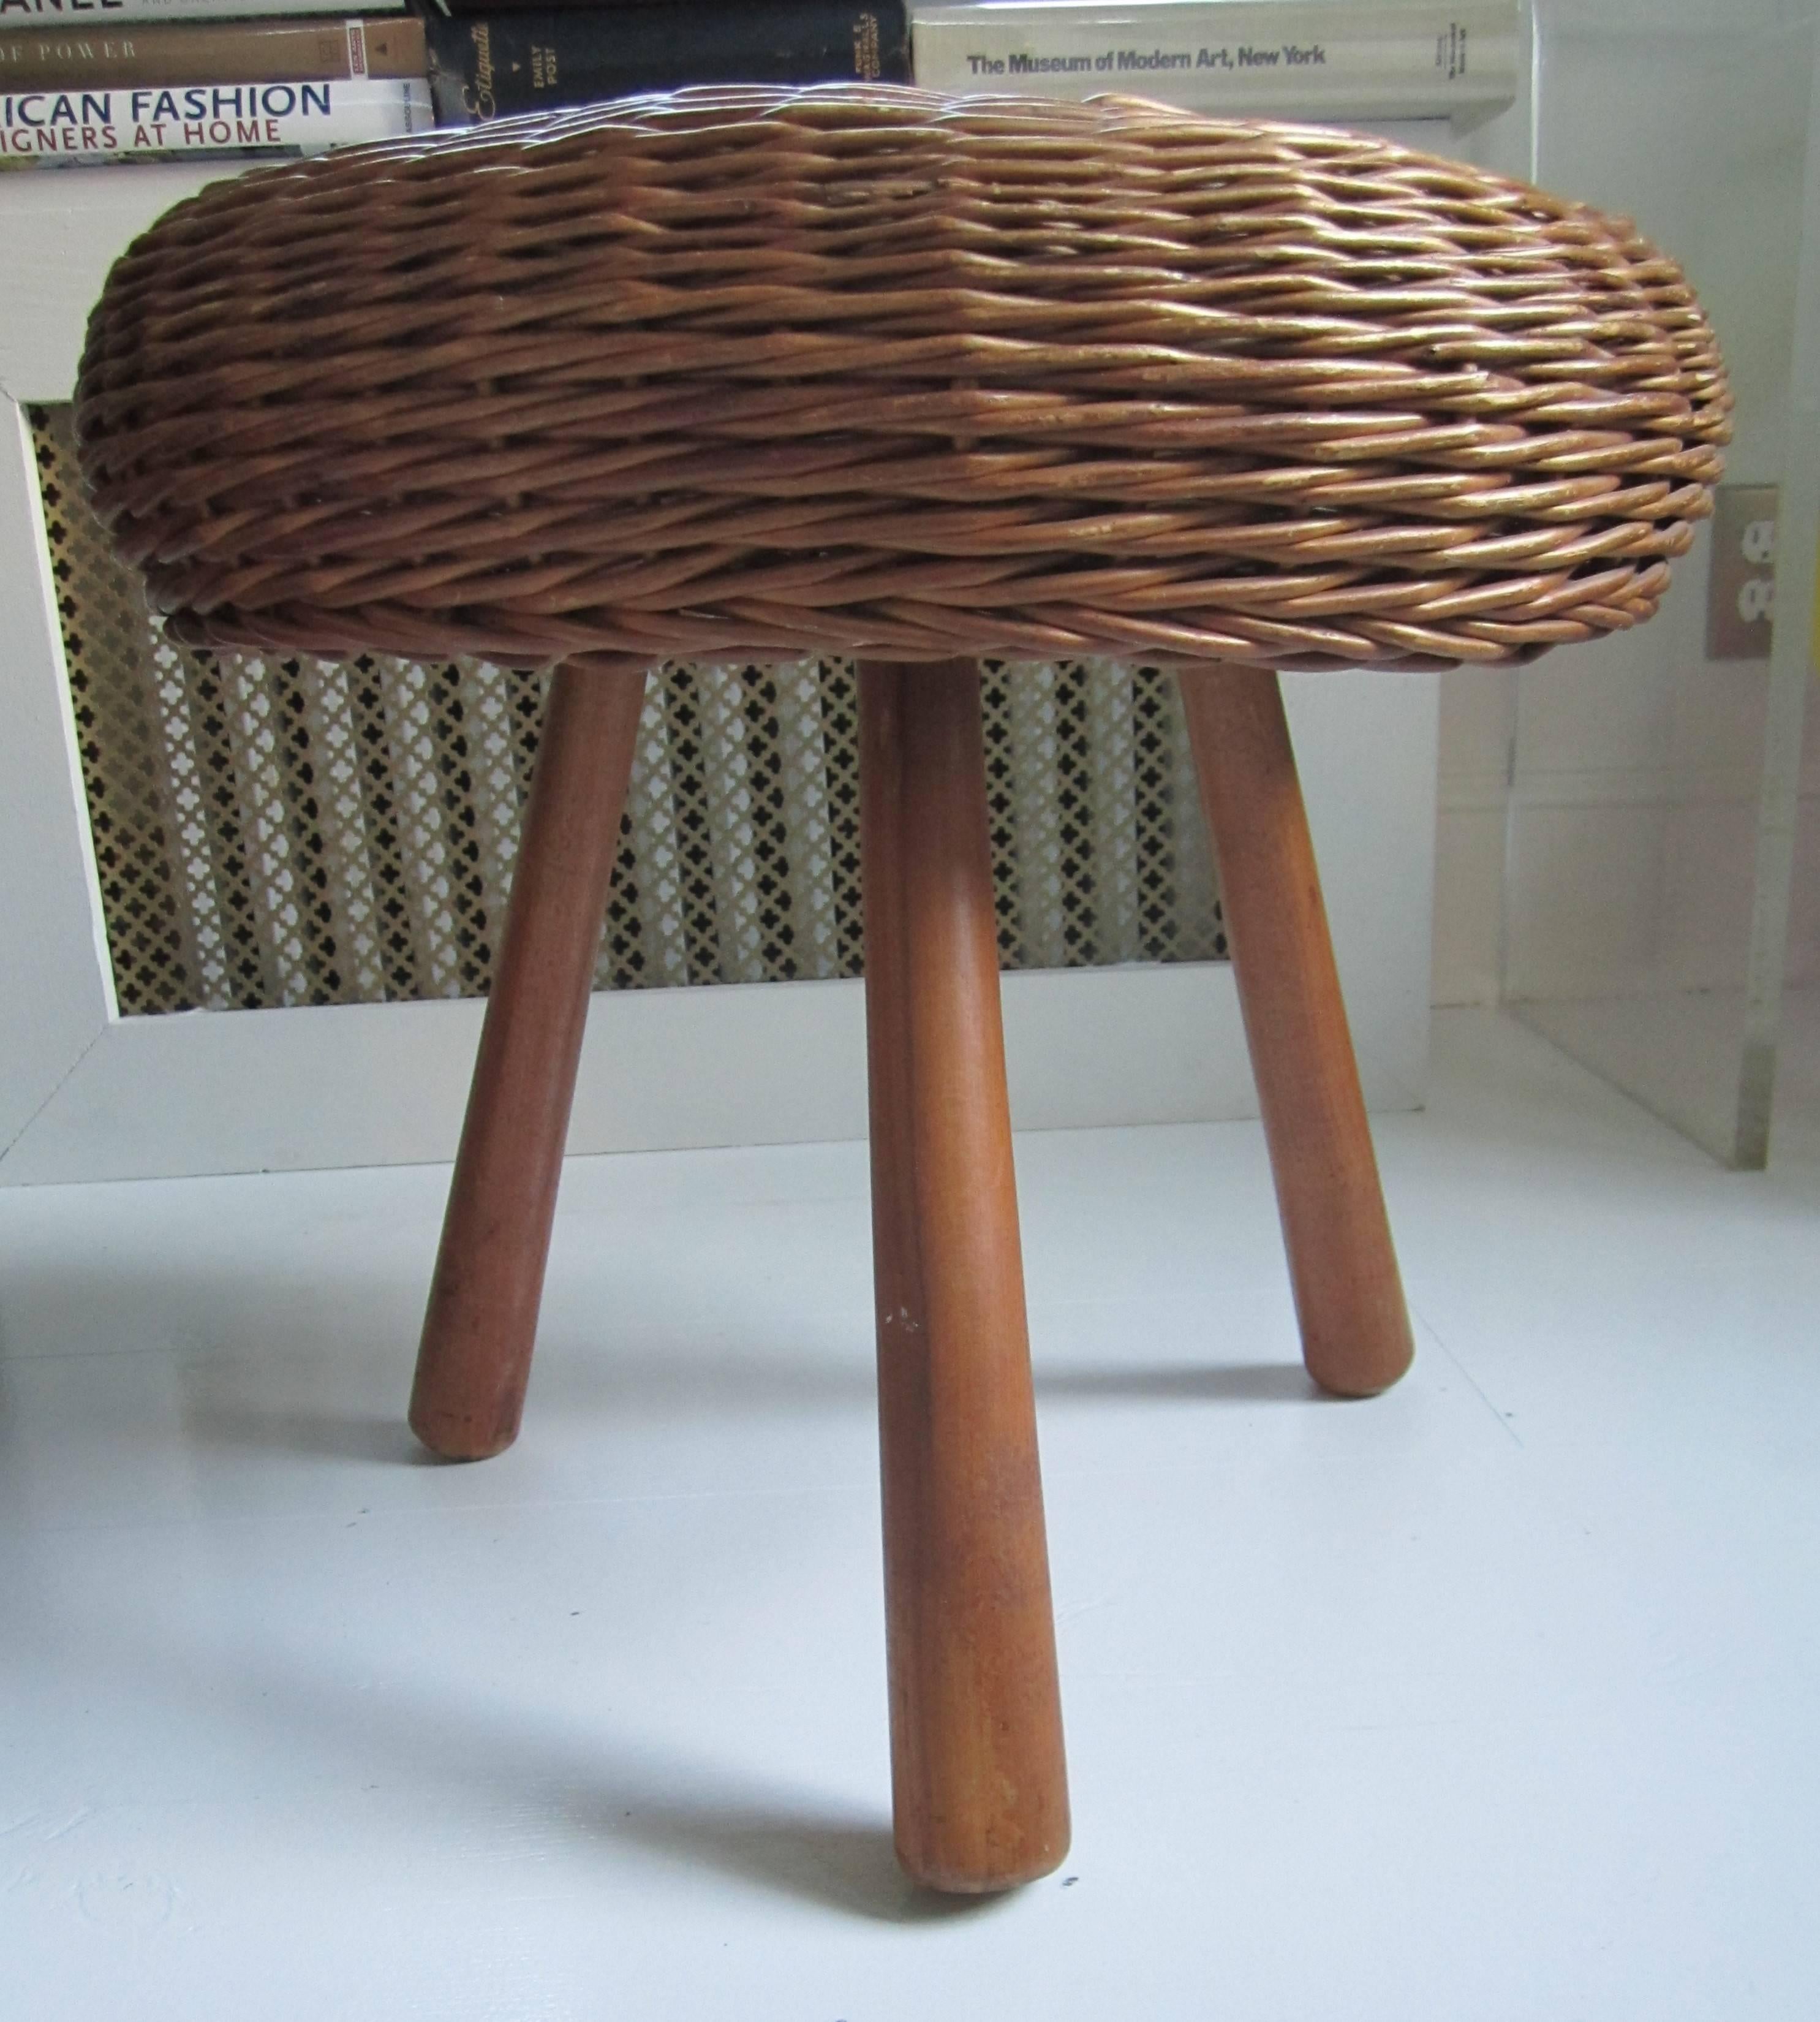 Mid-20th Century Midcentury European Wicker and Wood Stool or Side Table